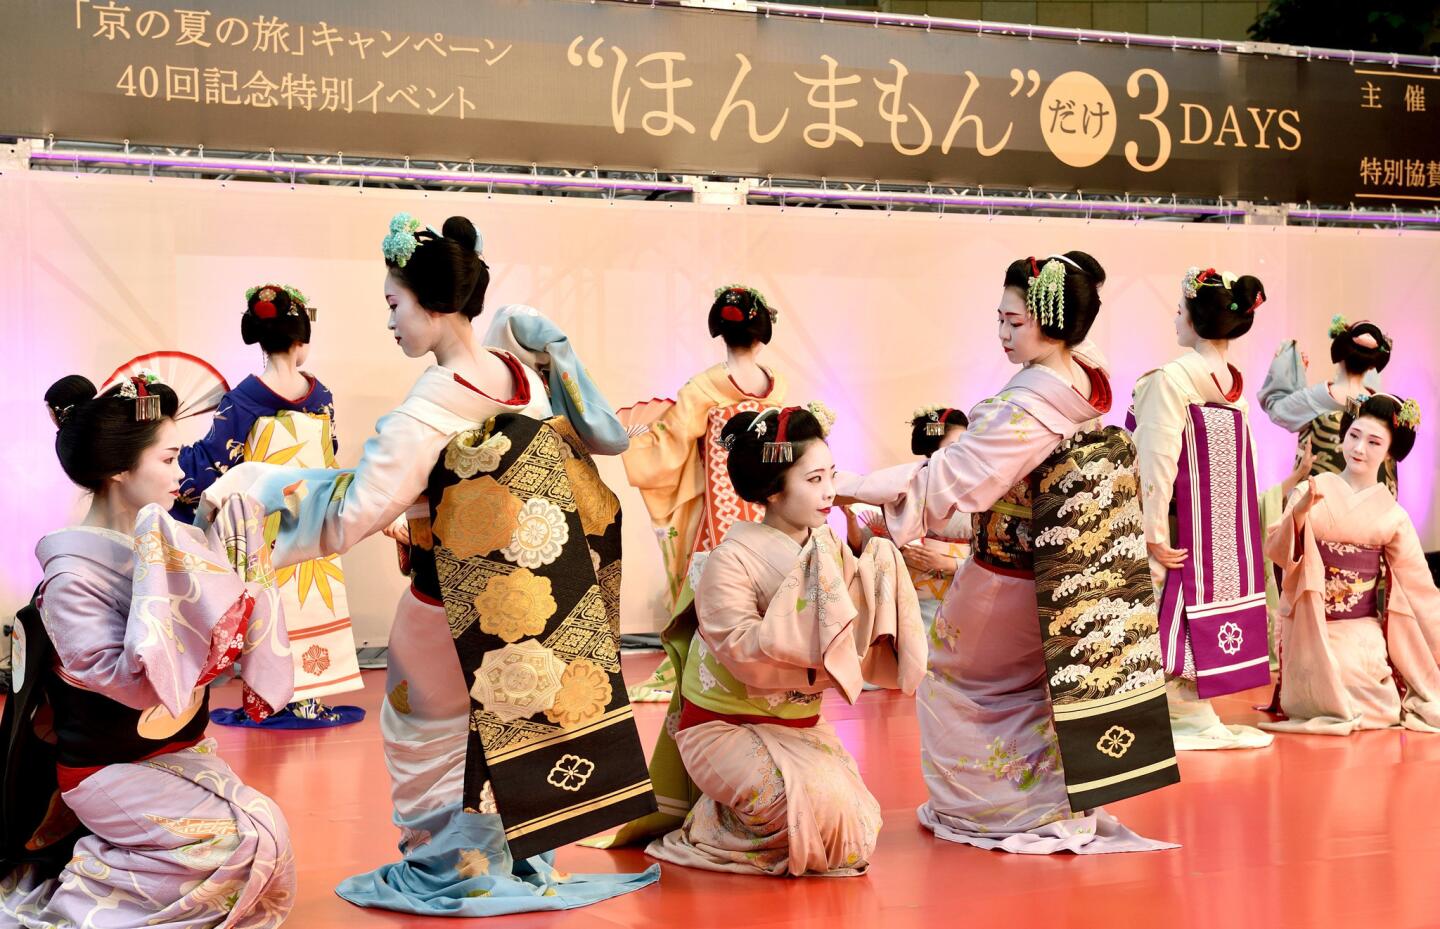 Maikos or apprentice geikos from Japan's ancient capital Kyoto, perform a traditional dance during a special event as part of the Kyoto summer travel campaign in Tokyo on June 21, 2015. The event was held to promote Kyoto tourism.